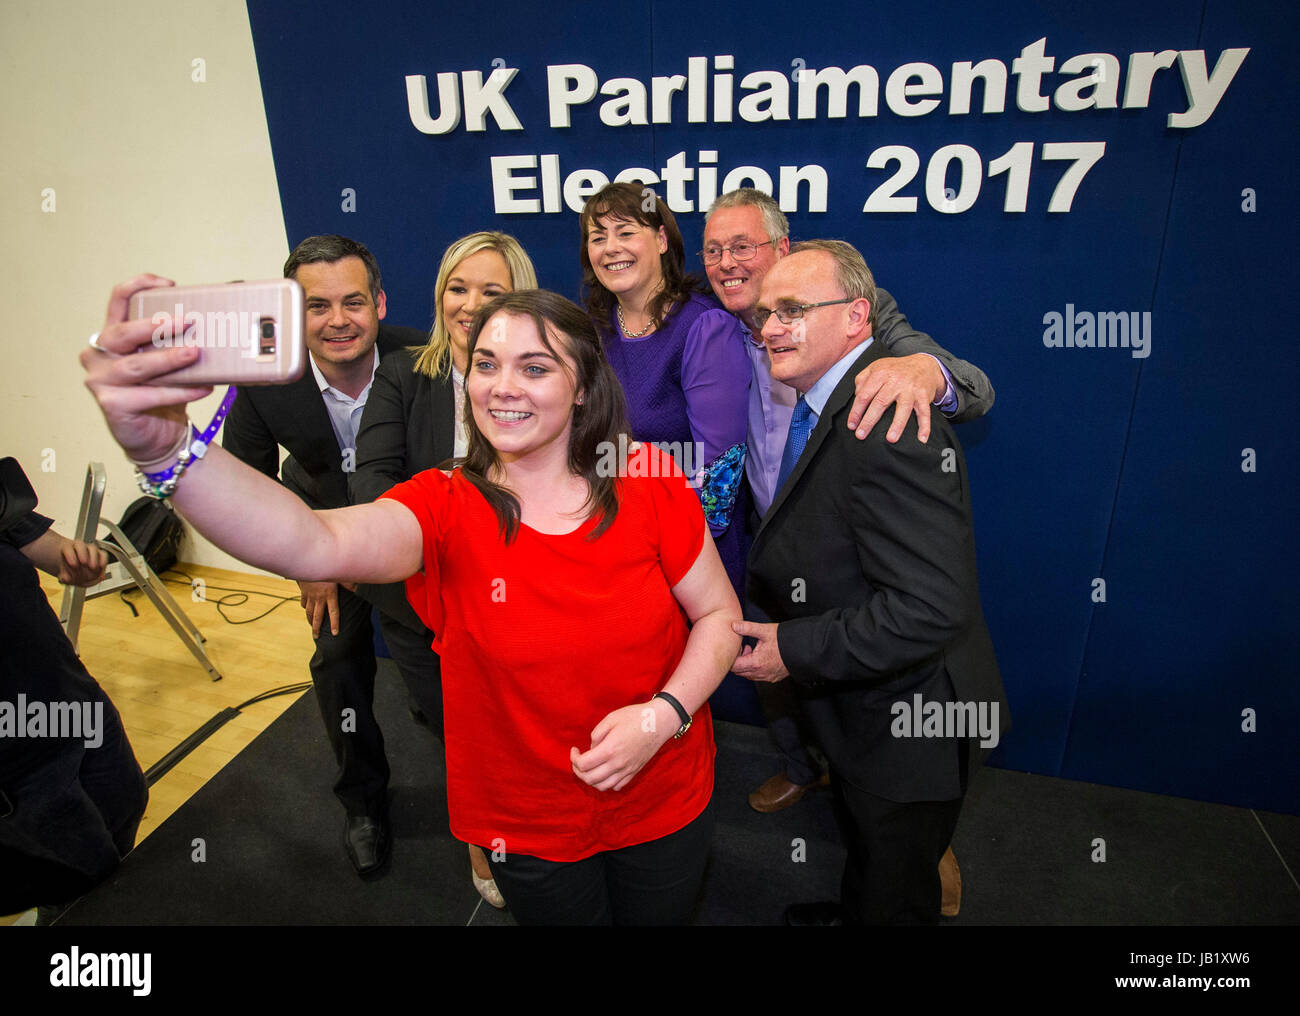 Sinn Fein's Jemma Dollan taking a selfie with (from the left) Pearse Doherty TD, Sinn Fein leader in Northern Ireland Michelle O'Neill, newly elected MP for Fermanagh & South Tyrone Michelle Gildernew, Sean Lynch, and newly elected MP for West Tyrone Barry McElduff at the Omagh Leisure Complex, Co Tyrone. Stock Photo